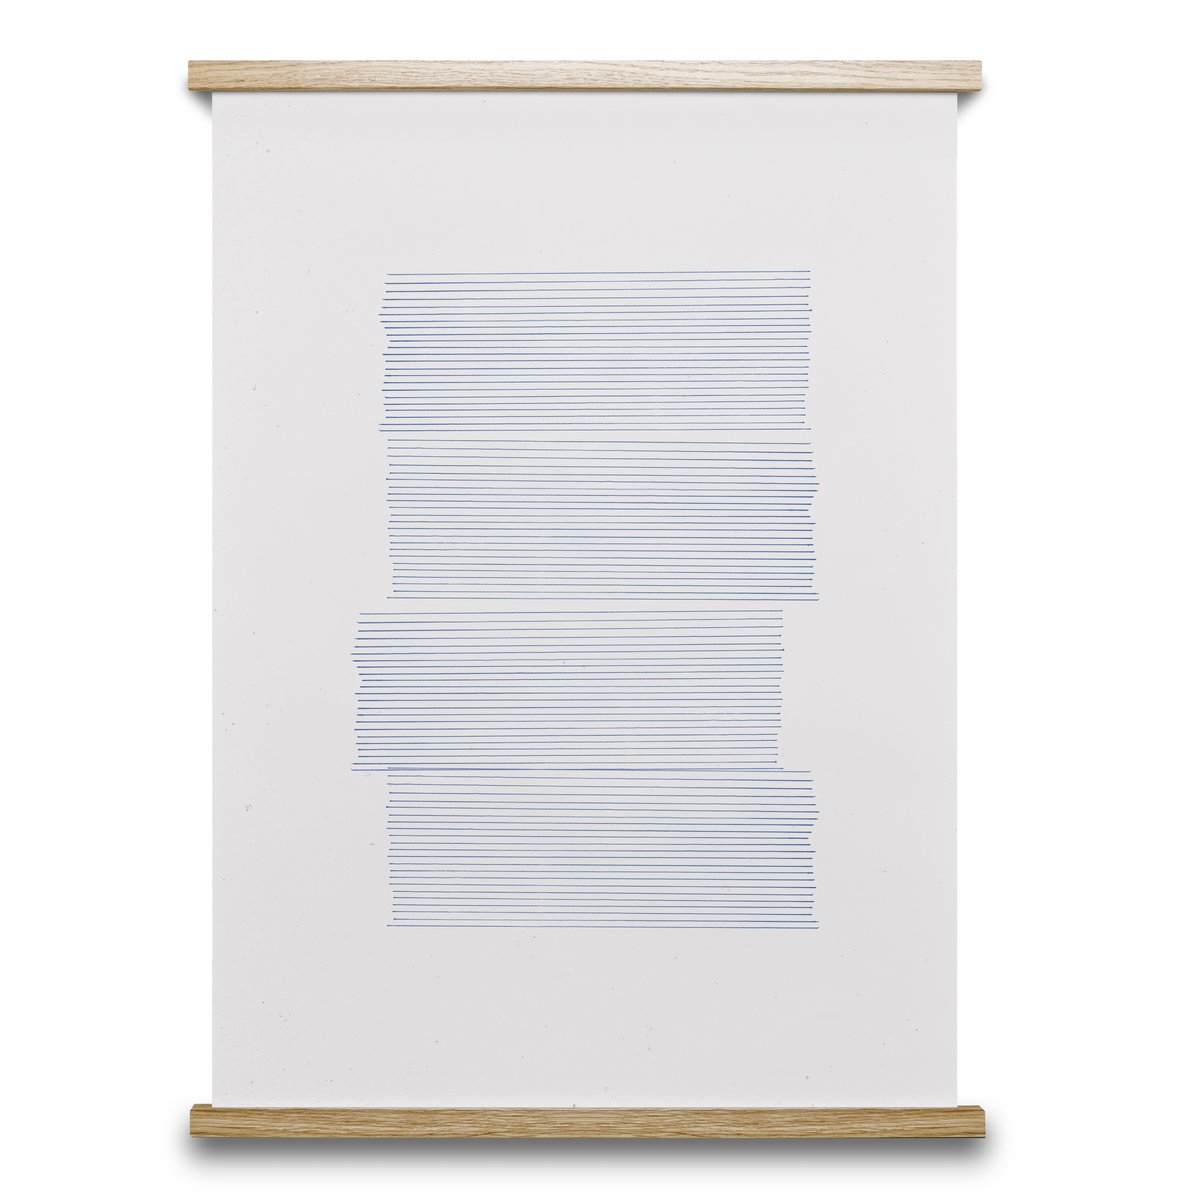 Paper Collective Into The Blue 01 poster 70 x 100 cm.